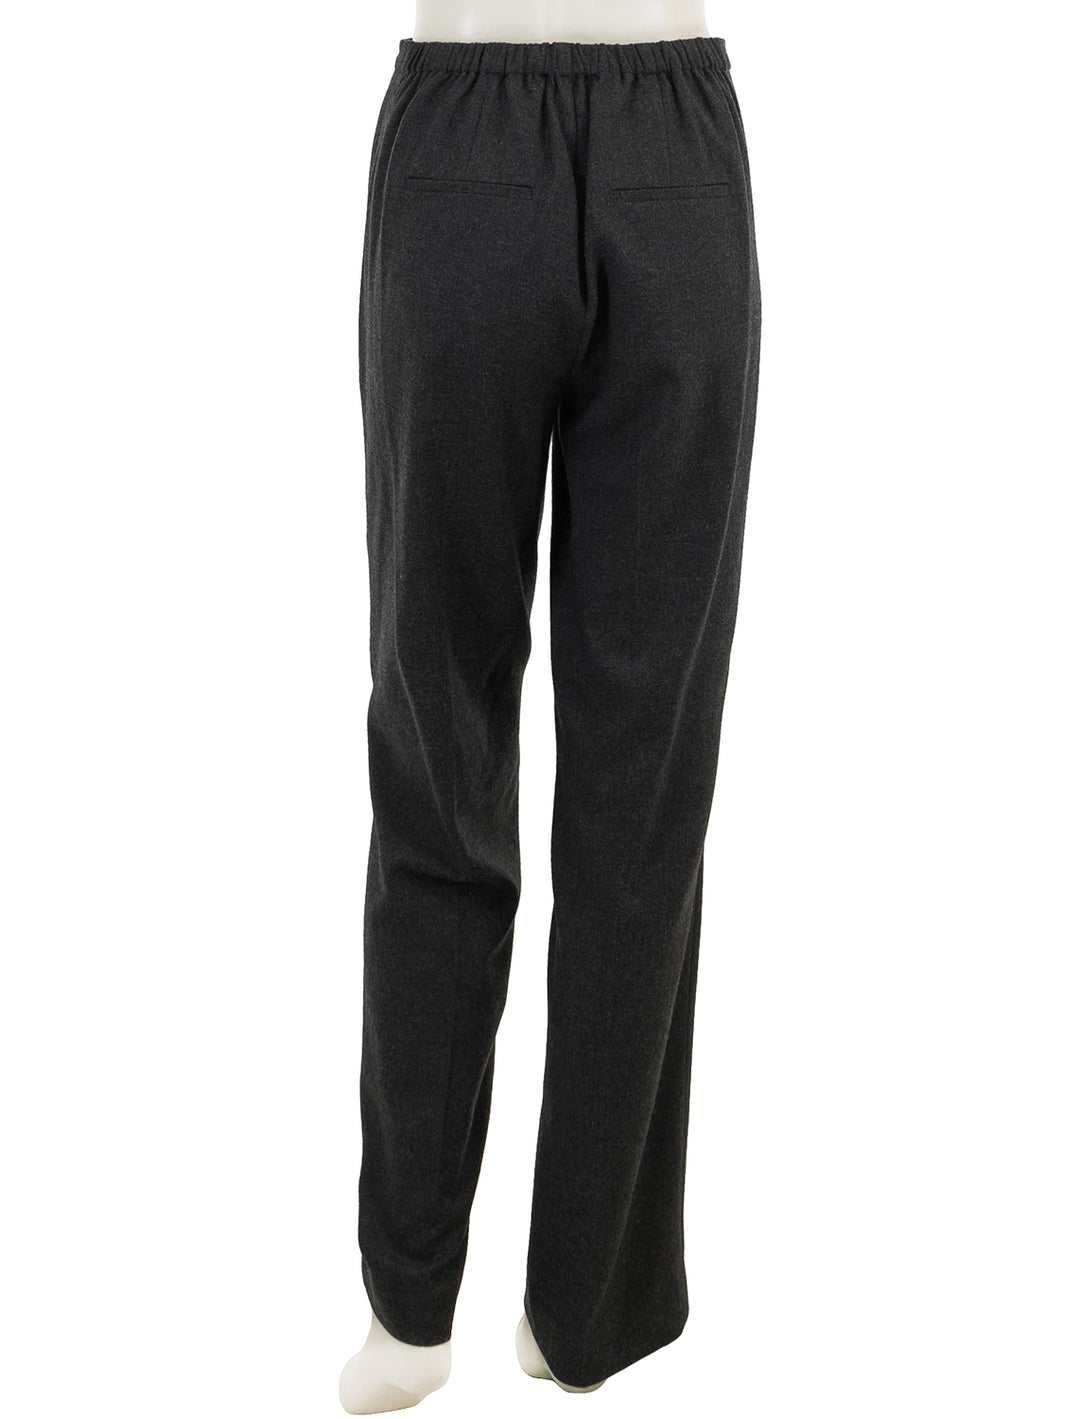 Back view of Vince's charcoal mid rise wide leg pant.